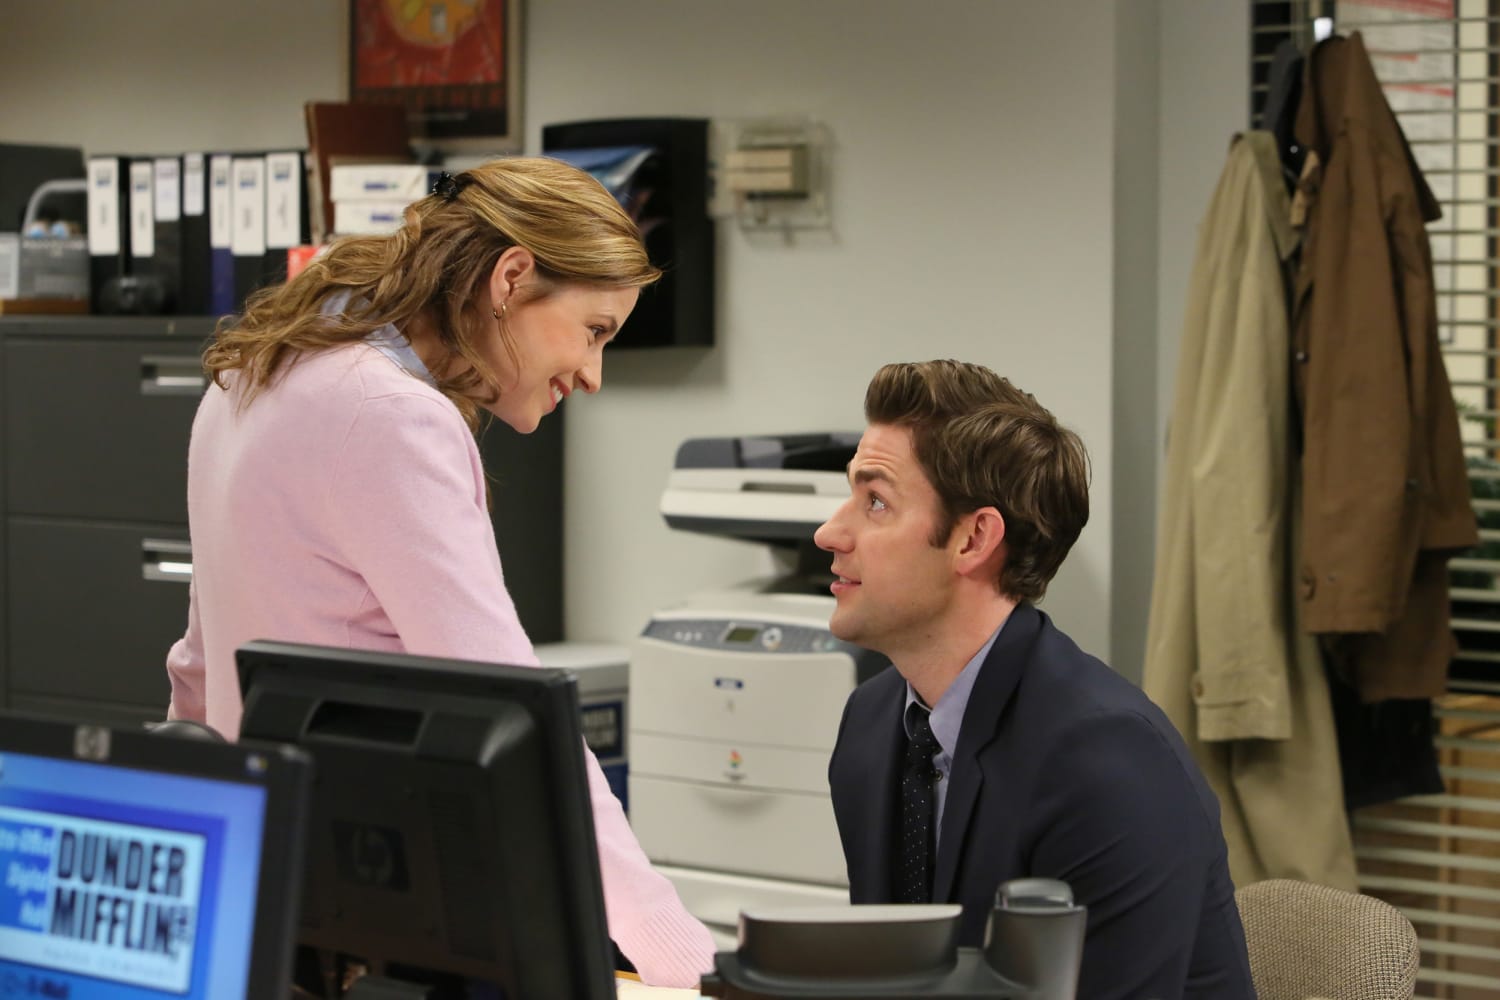 Why The Office's Pam Quit Dunder Mifflin